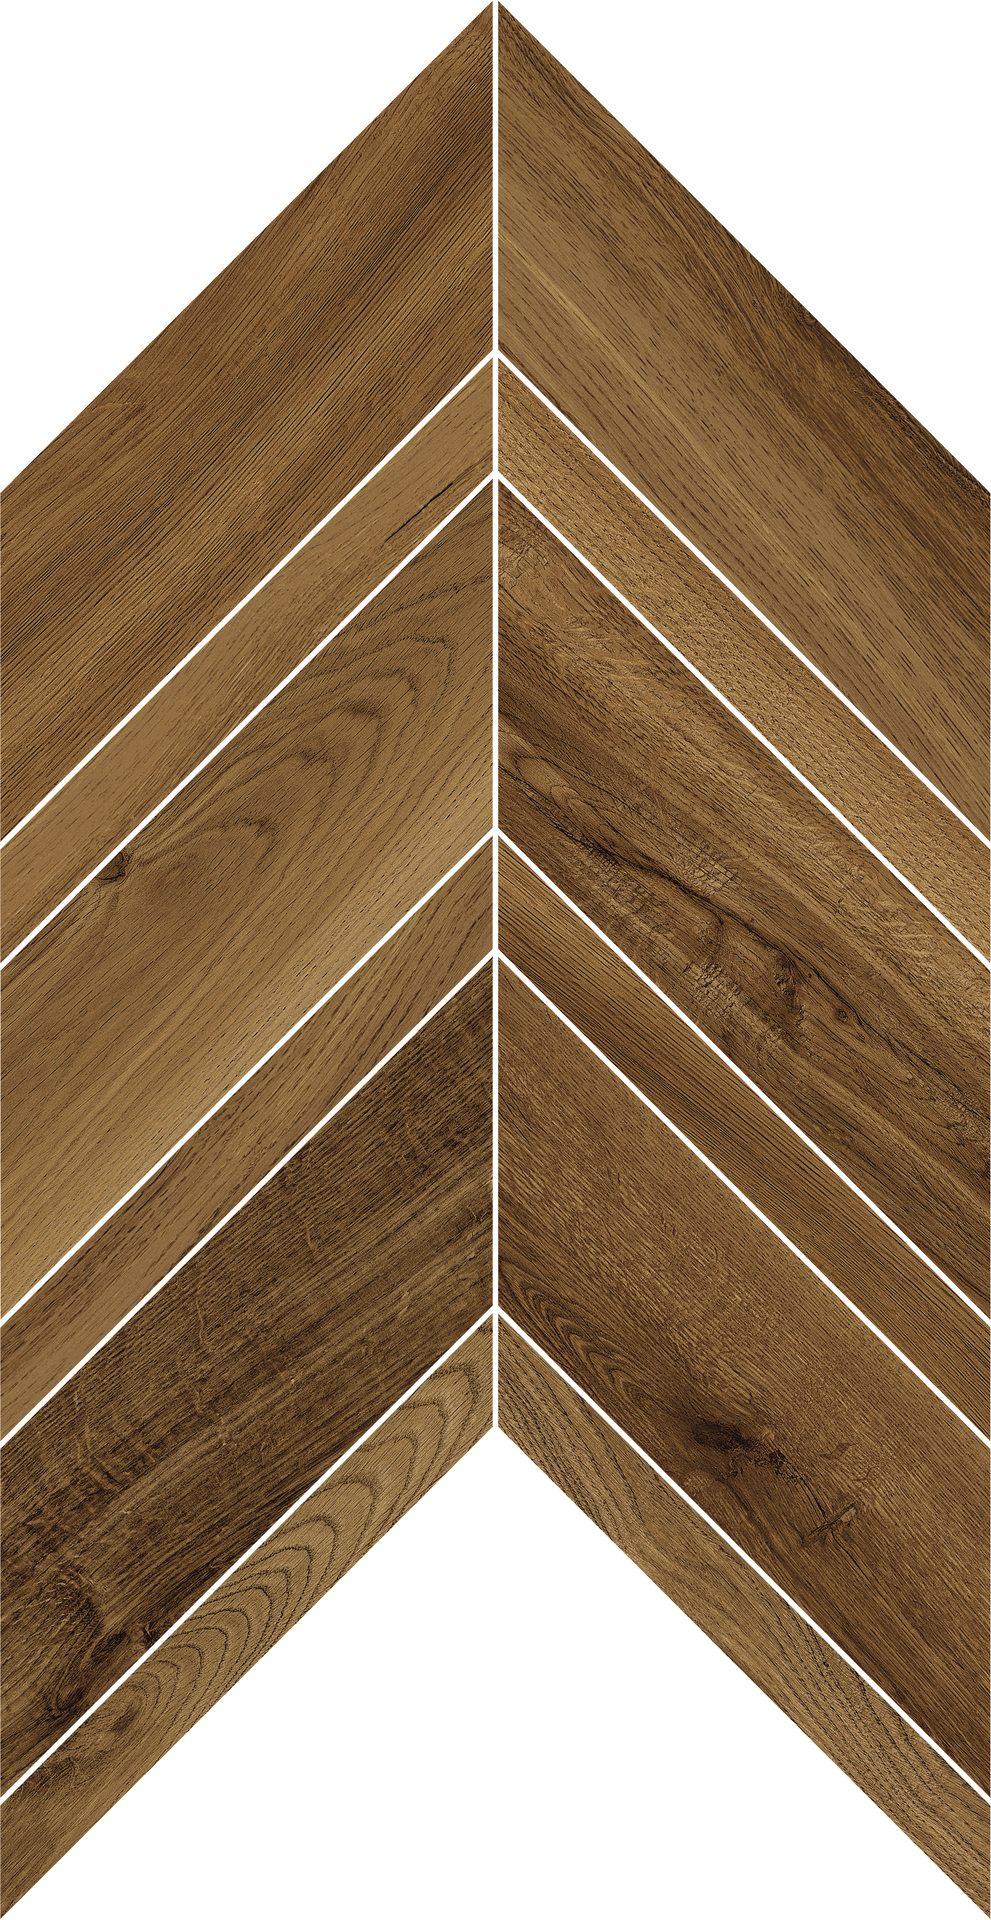 Panaria Nuance Tabacco Antibacterial - Naturale Chevron PGZN114 37,4x48,6cm rectified 9,5mm